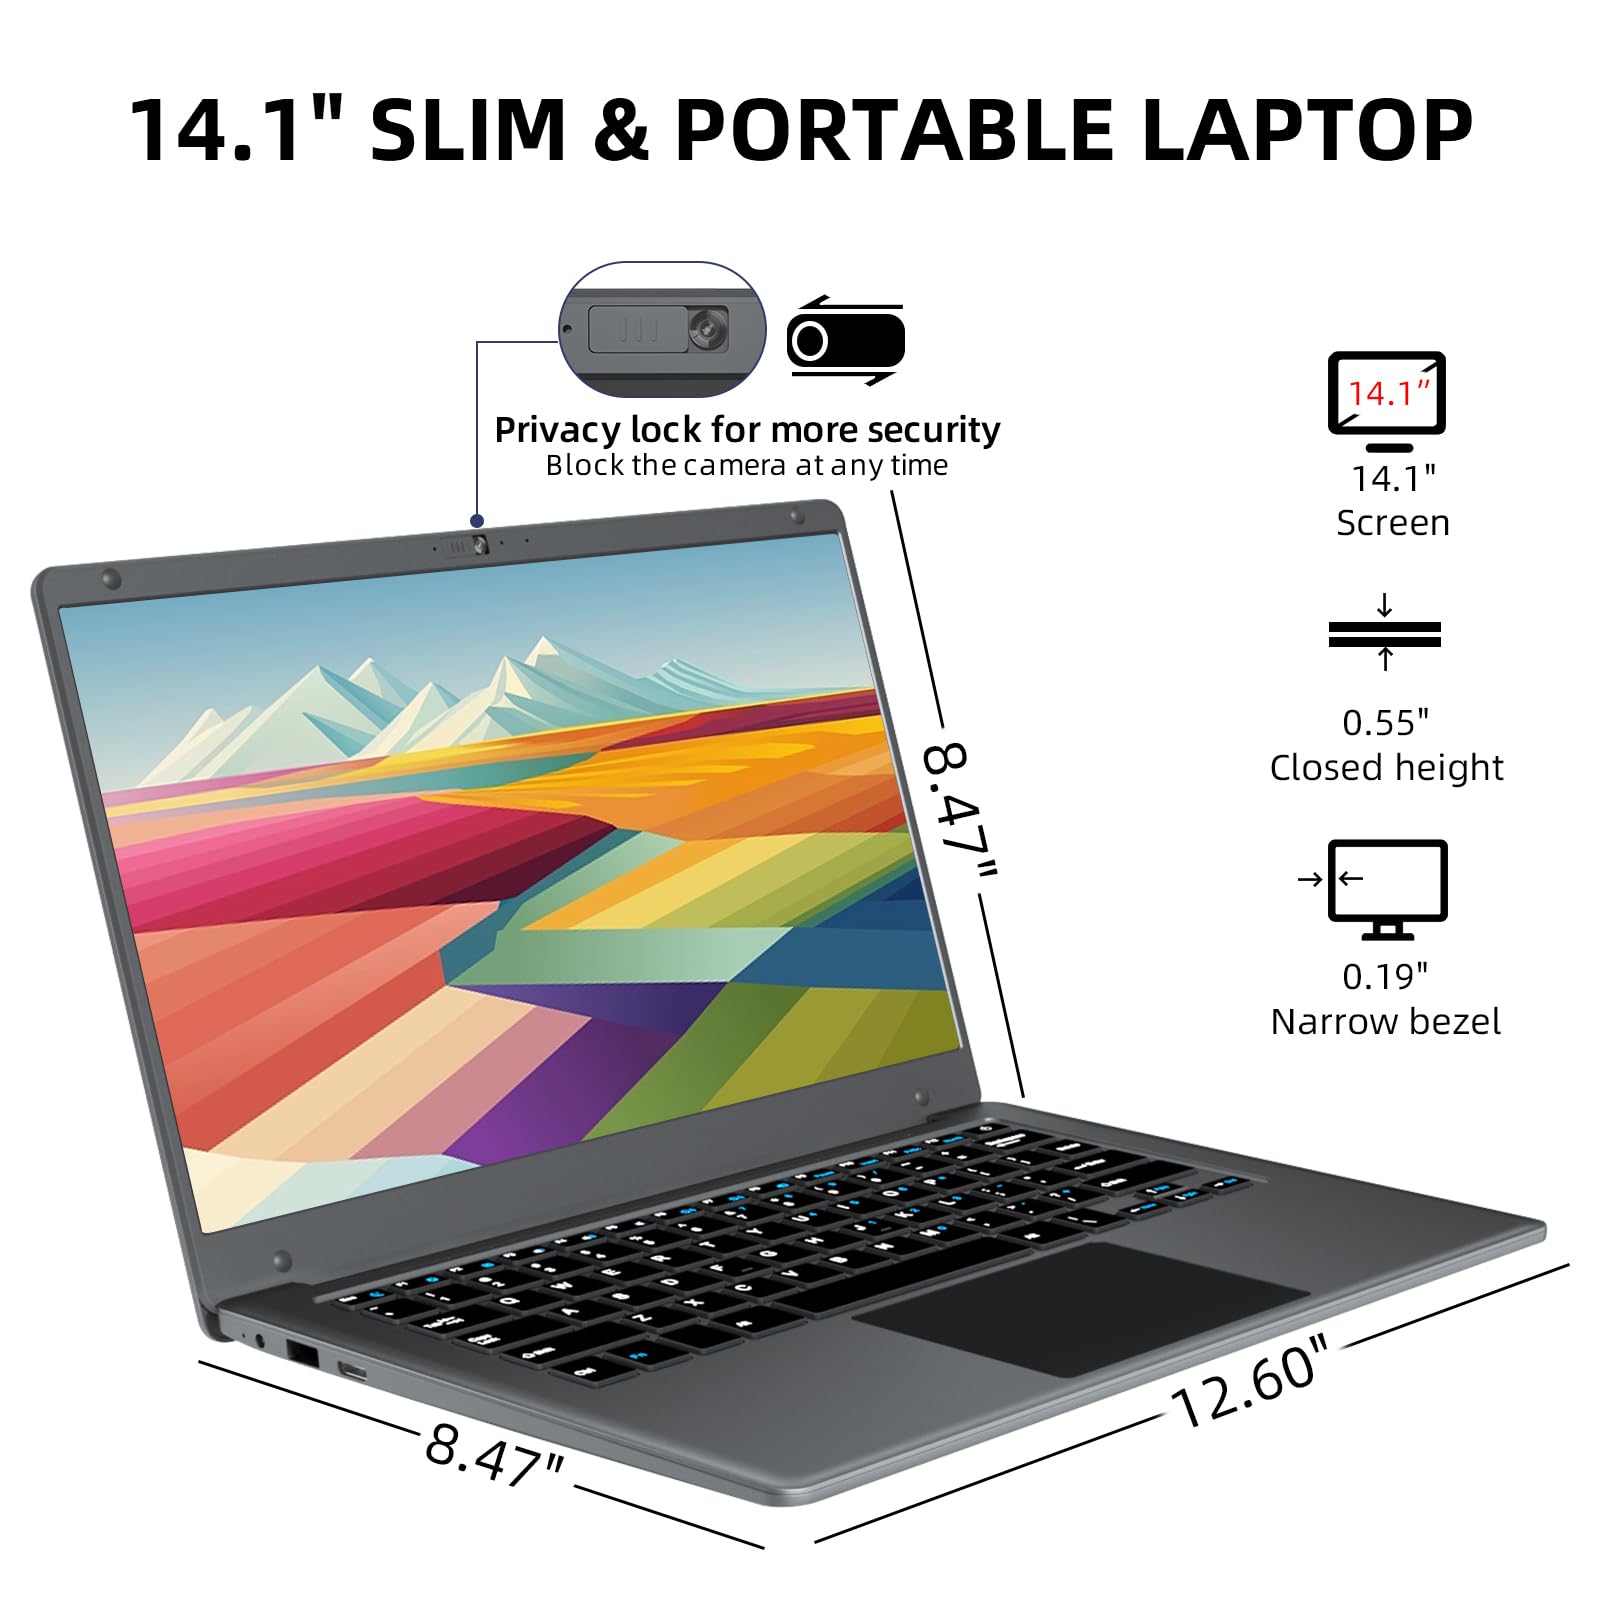 Morostron 13.5" Touch Screen Laptop, Win11 Laptop Computer with N5095, 16GB RAM 256GB SSD, 3000x2000 FHD, Backlit Keyboard, Touch ID, WiFi, USB3.0 * 2, Bluetooth 4.2, HDMI, 38WH Battery, Gray